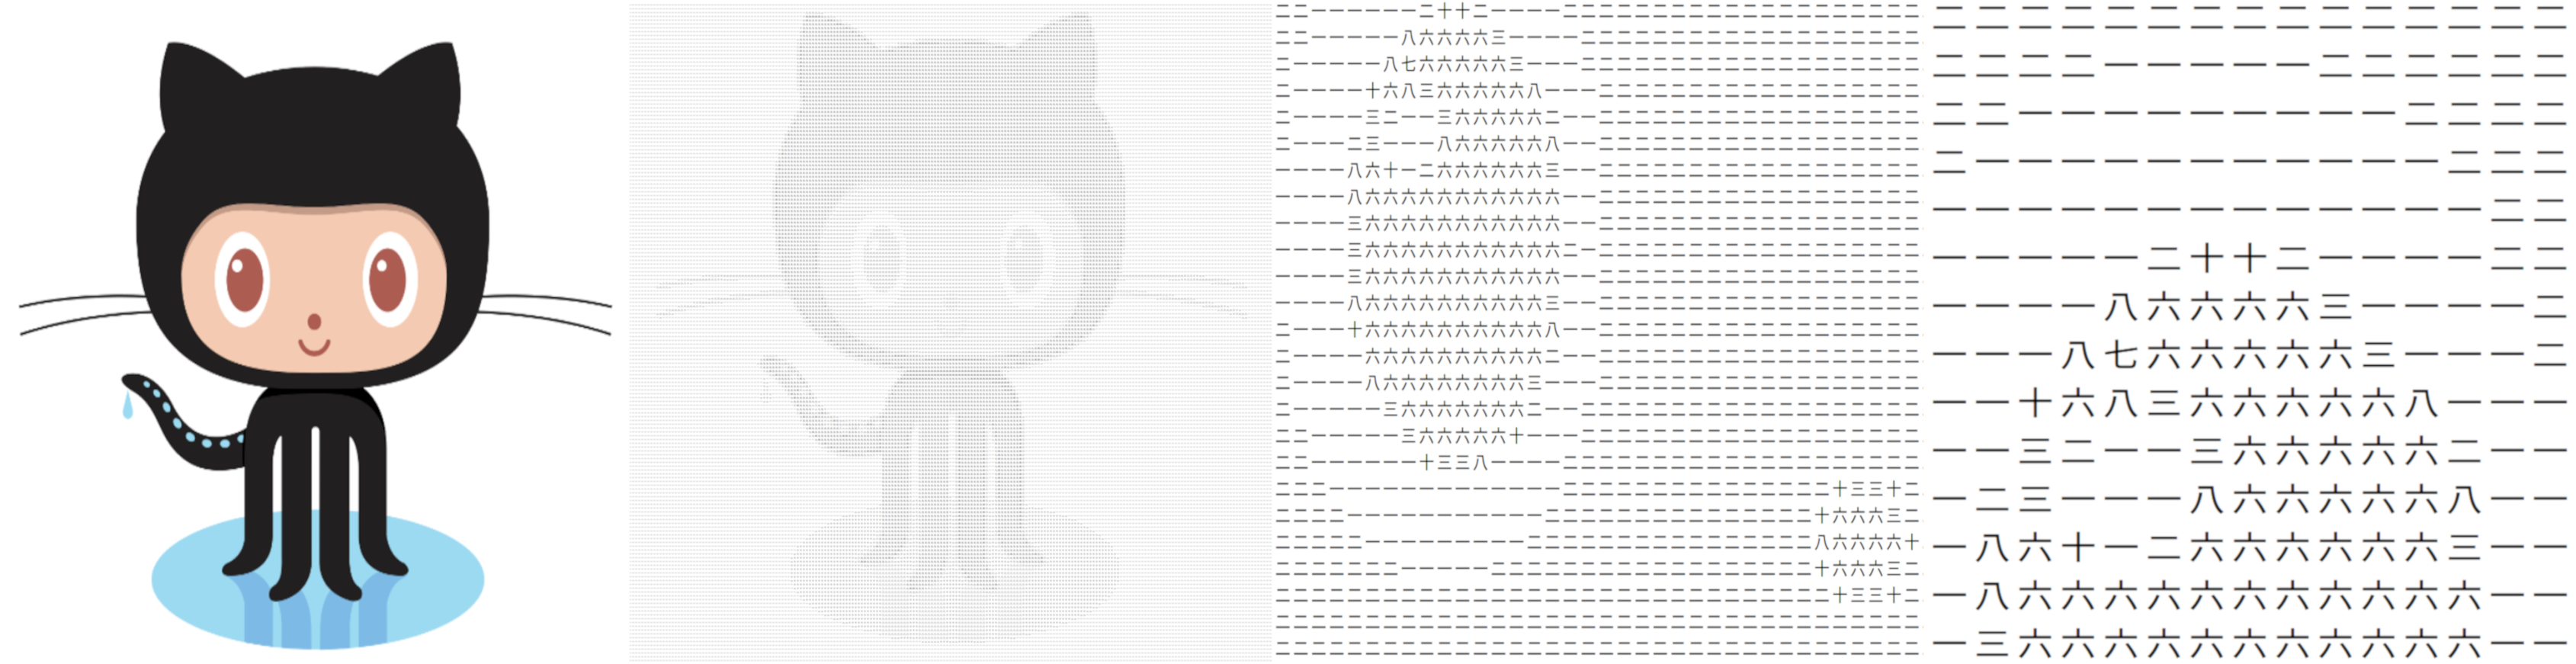 octocat_image_to_text_comparasion_4.png